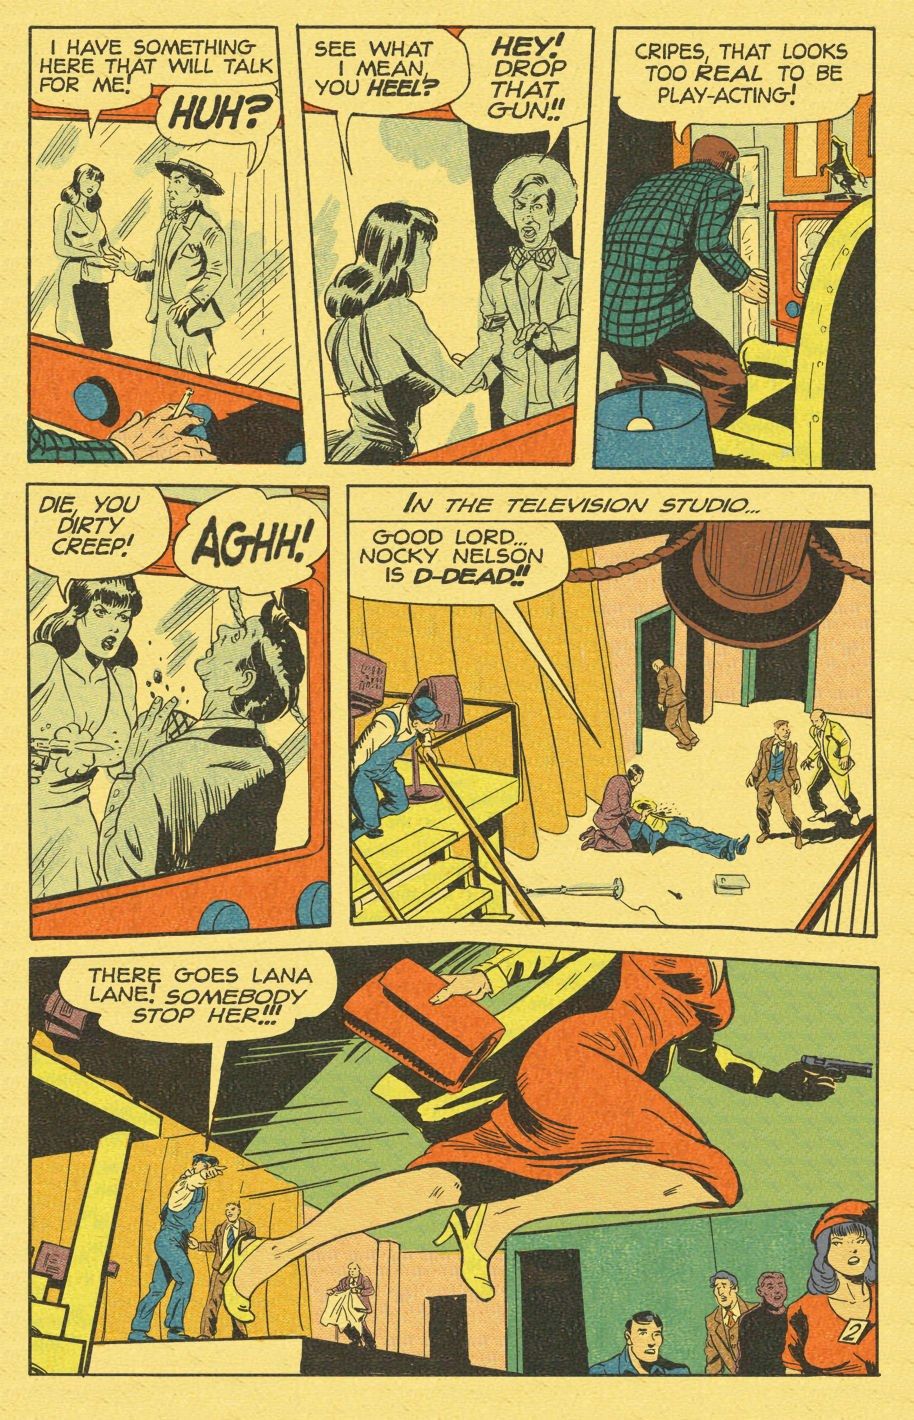 Crime Smashers Part 1 The Wertham Files page 25